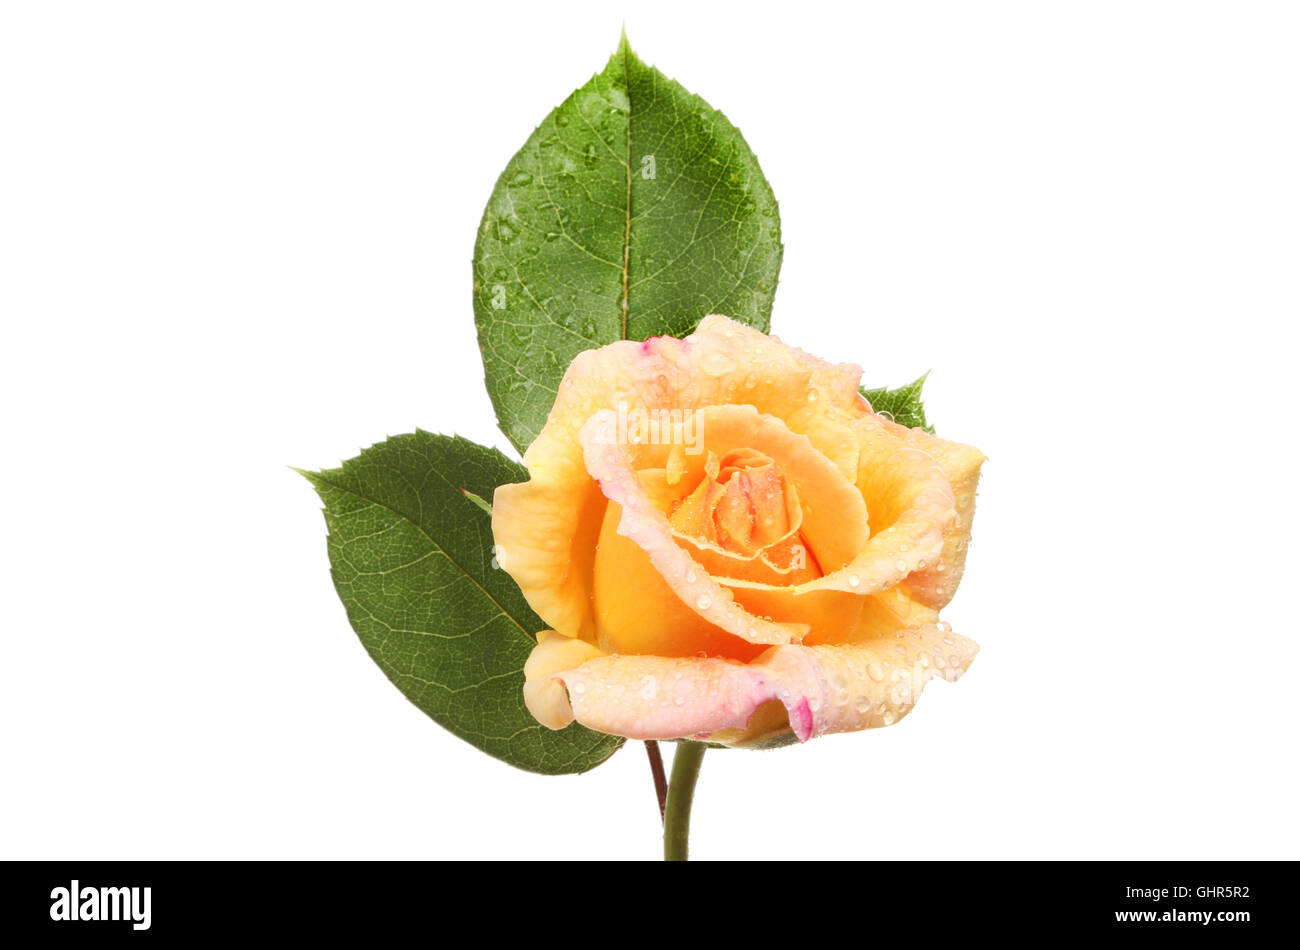 Peach colored rose and foliage with water droplets isolated against white Stock Photo